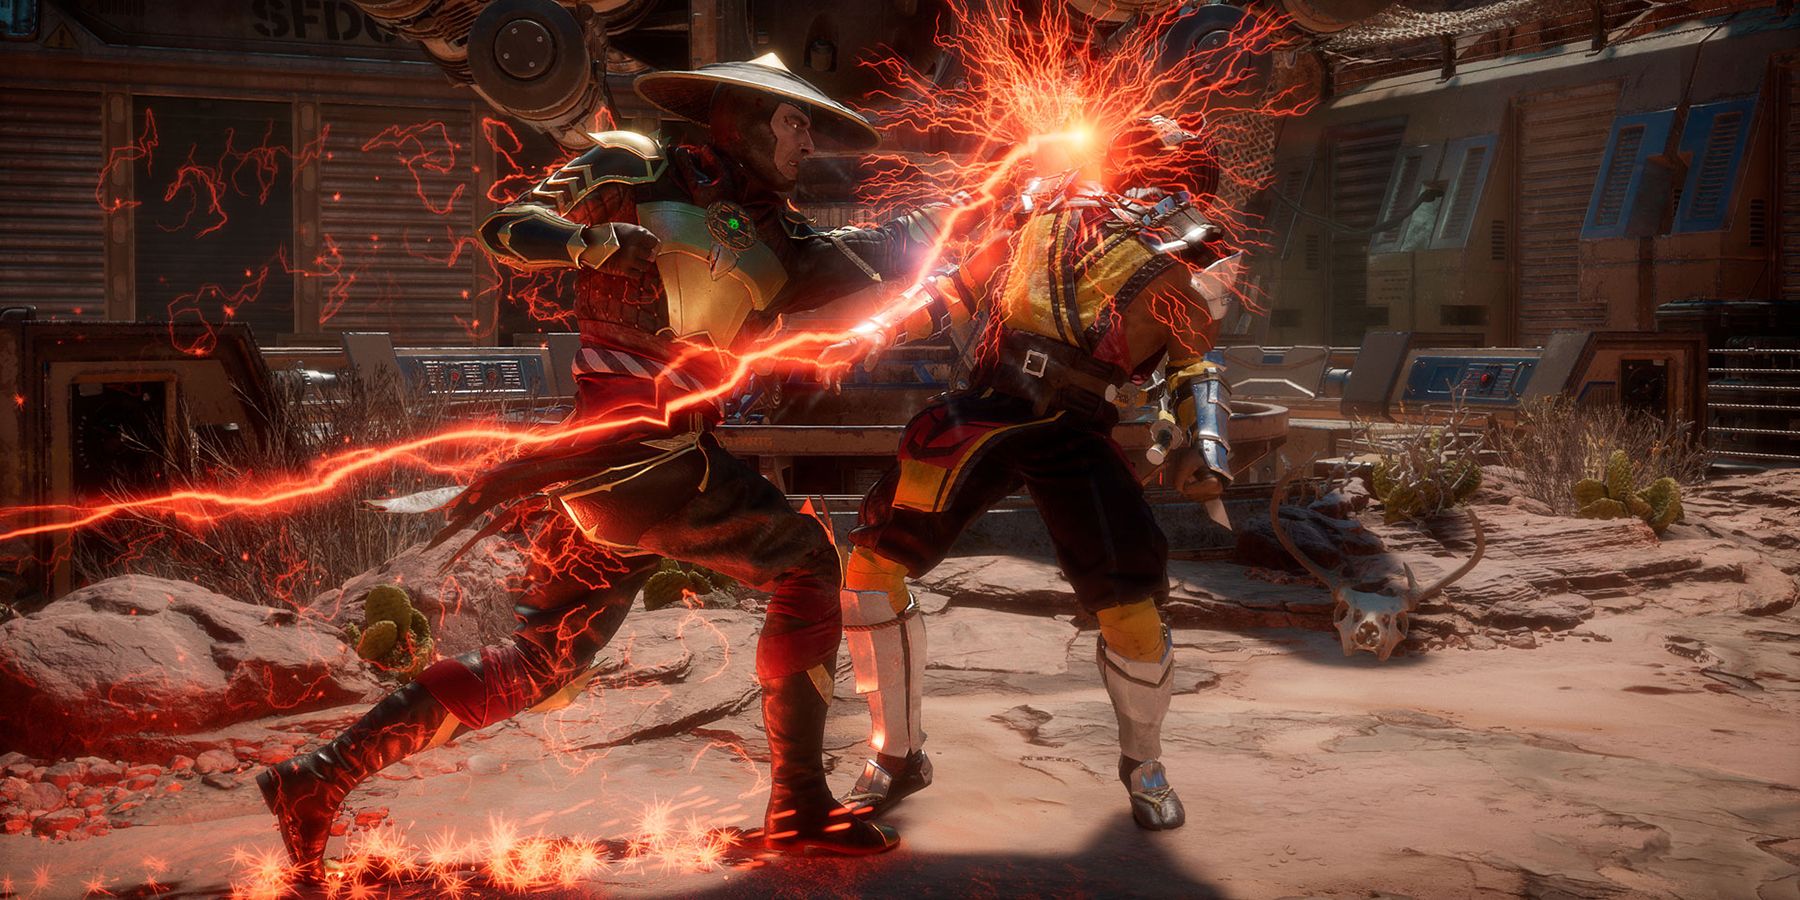 Mortal Kombat 11 fight Raiden lays a super-punch on Scorpion in Special Forces base